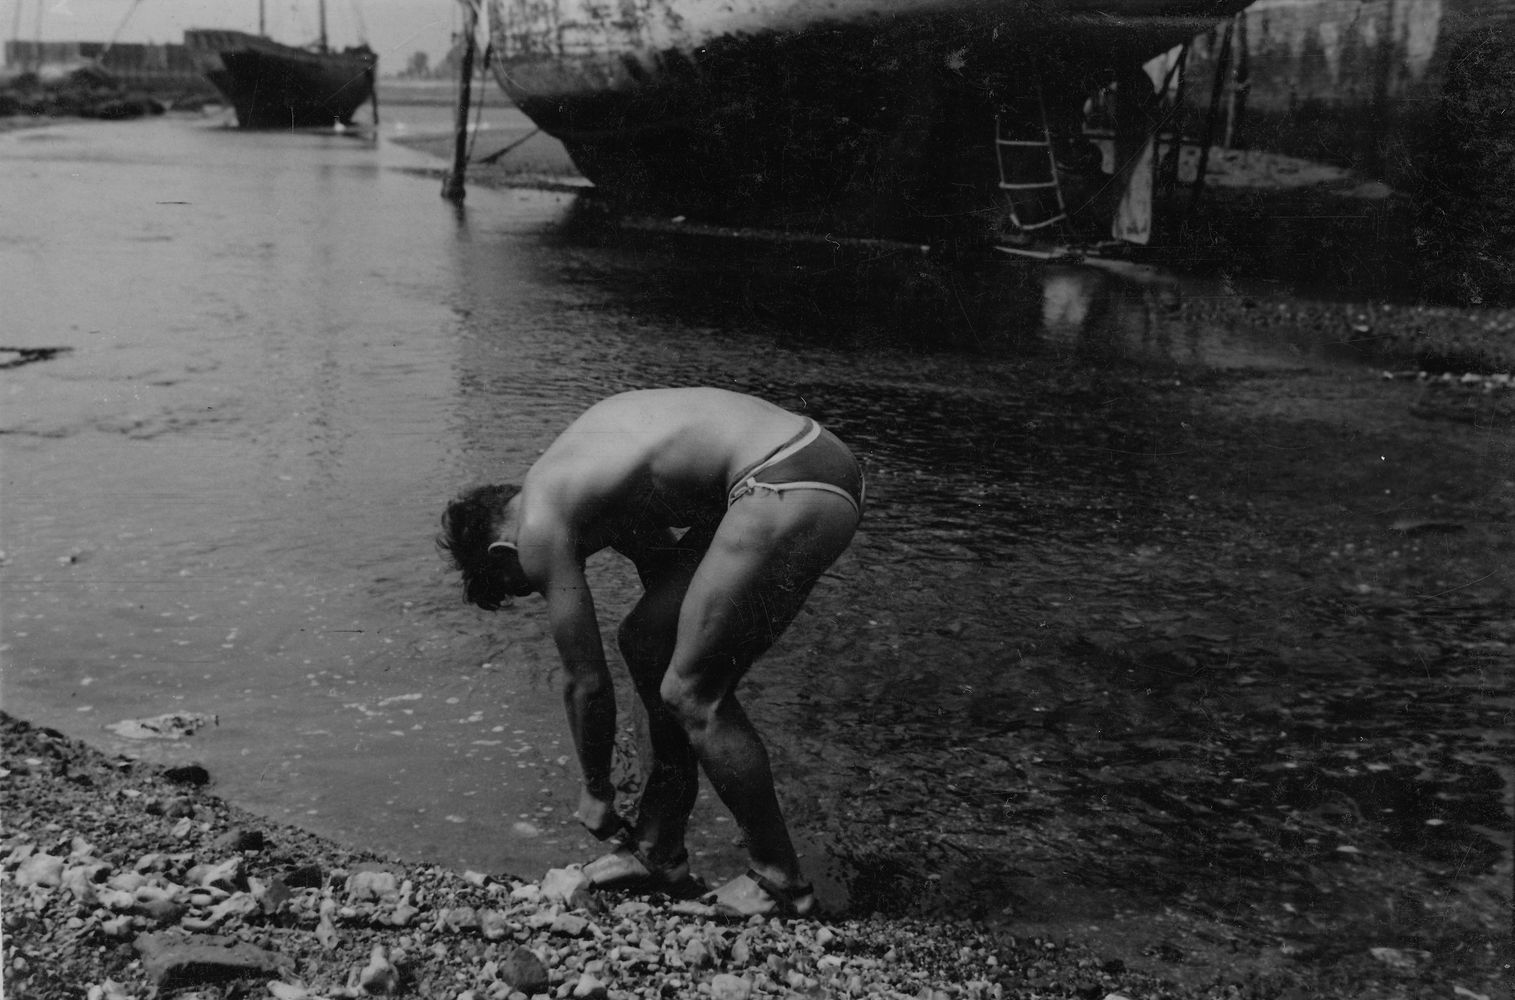 Male figure crouching at water’s edge [P52]